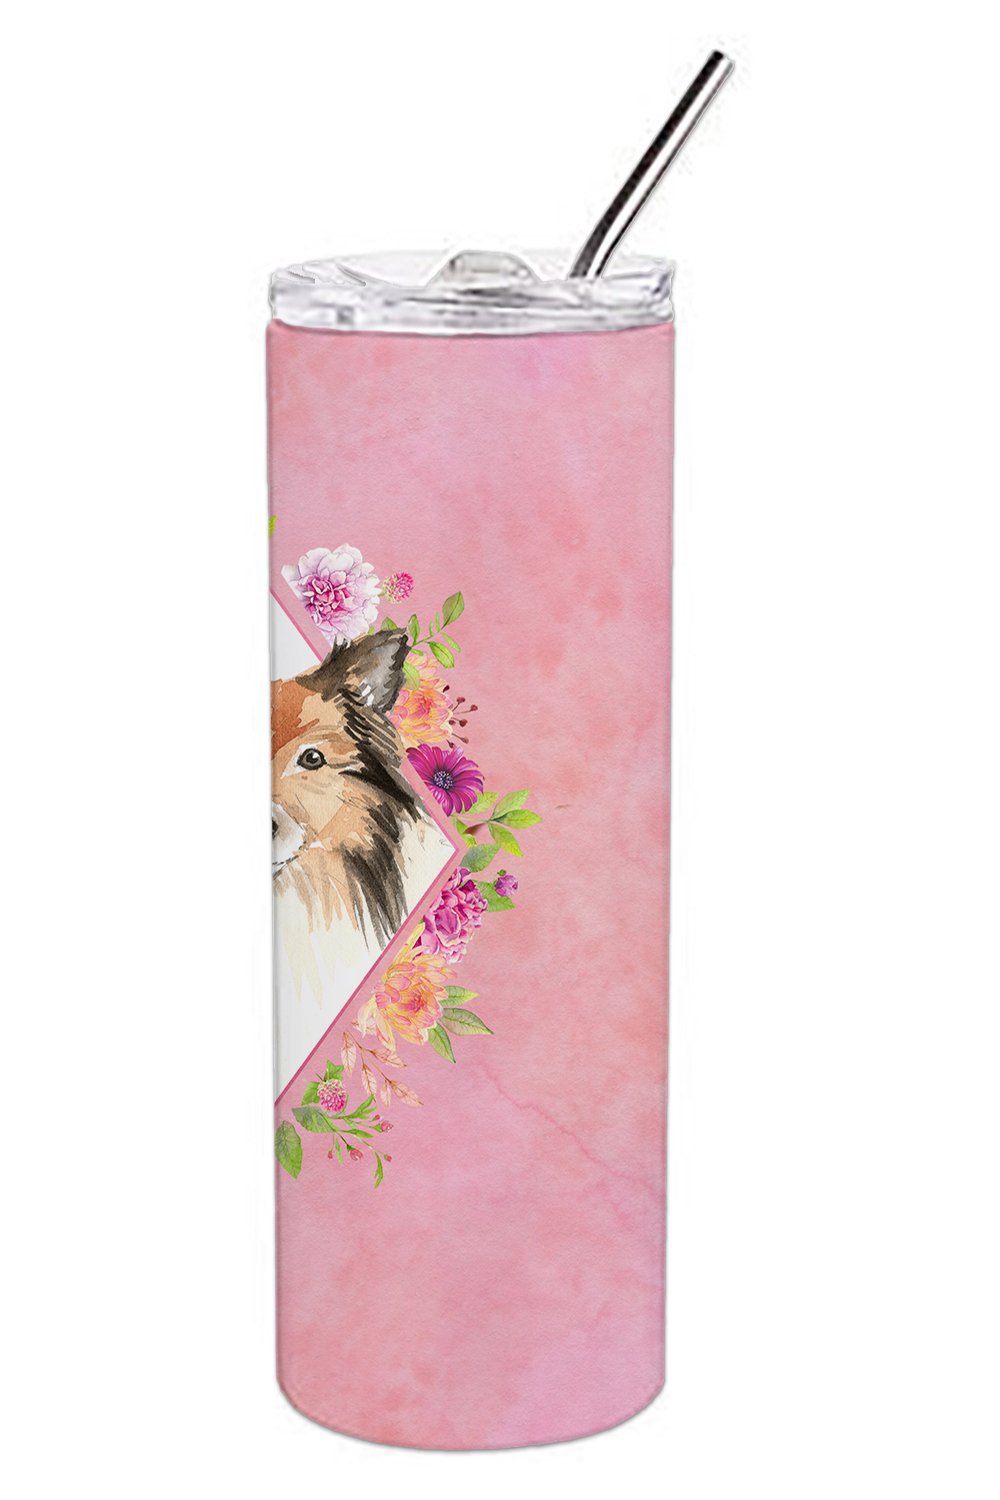 Sheltie Pink Flowers Double Walled Stainless Steel 20 oz Skinny Tumbler CK4213TBL20 by Caroline's Treasures